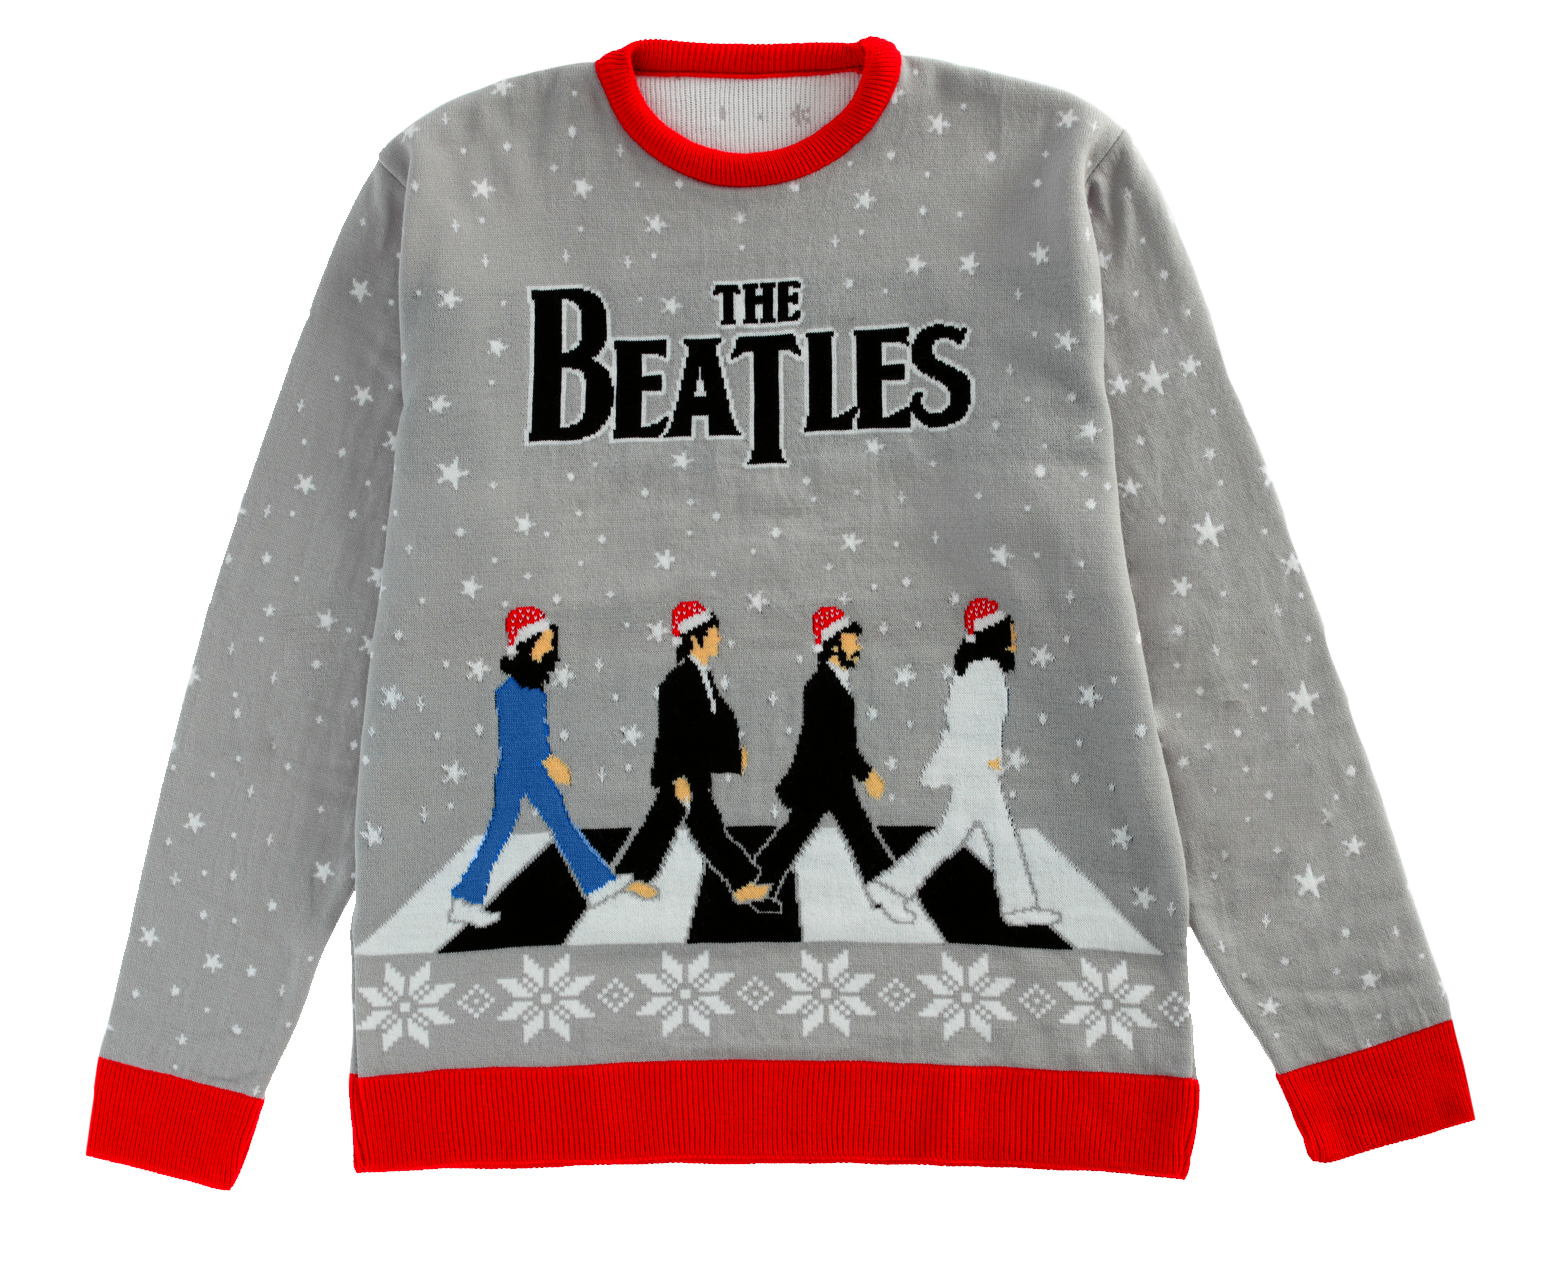 The Beatles - Snow and Then: The Beatles Christmas Jumper